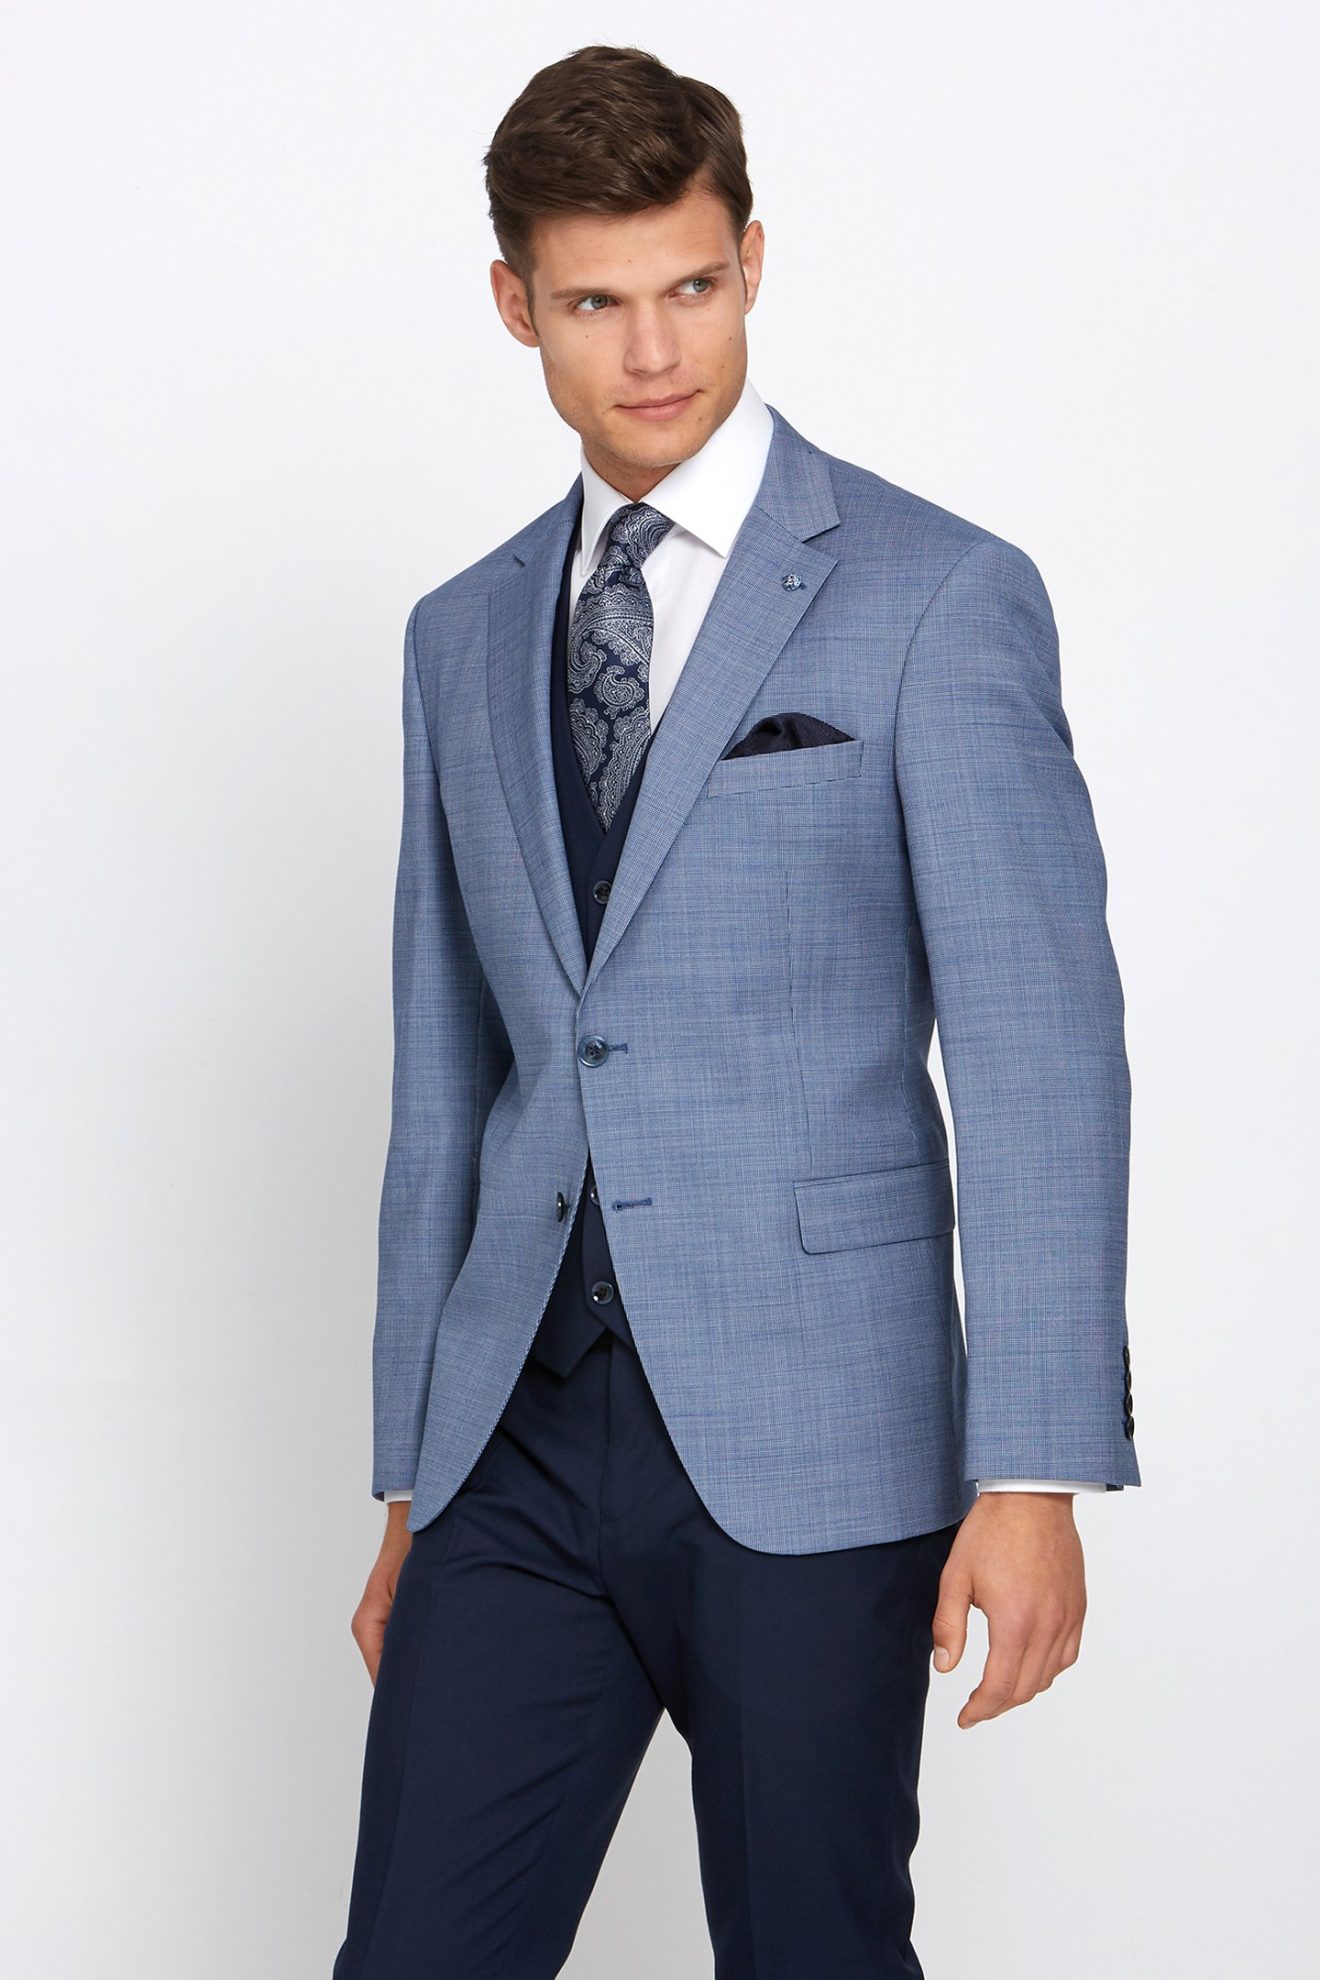 Image of a male model wearing a Benetti suit.